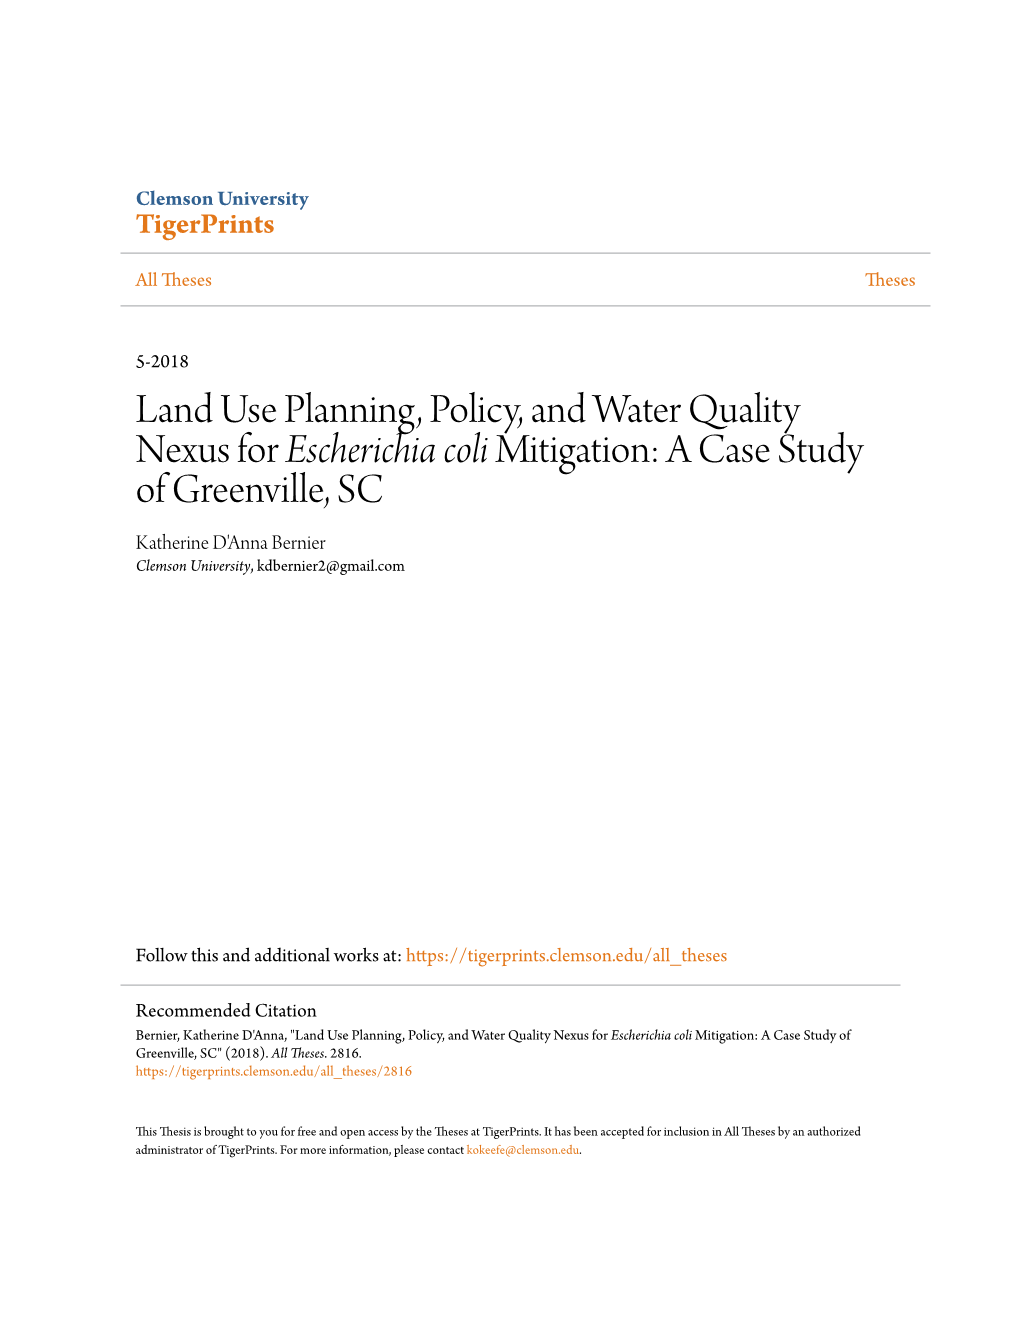 Land Use Planning, Policy, and Water Quality Nexus